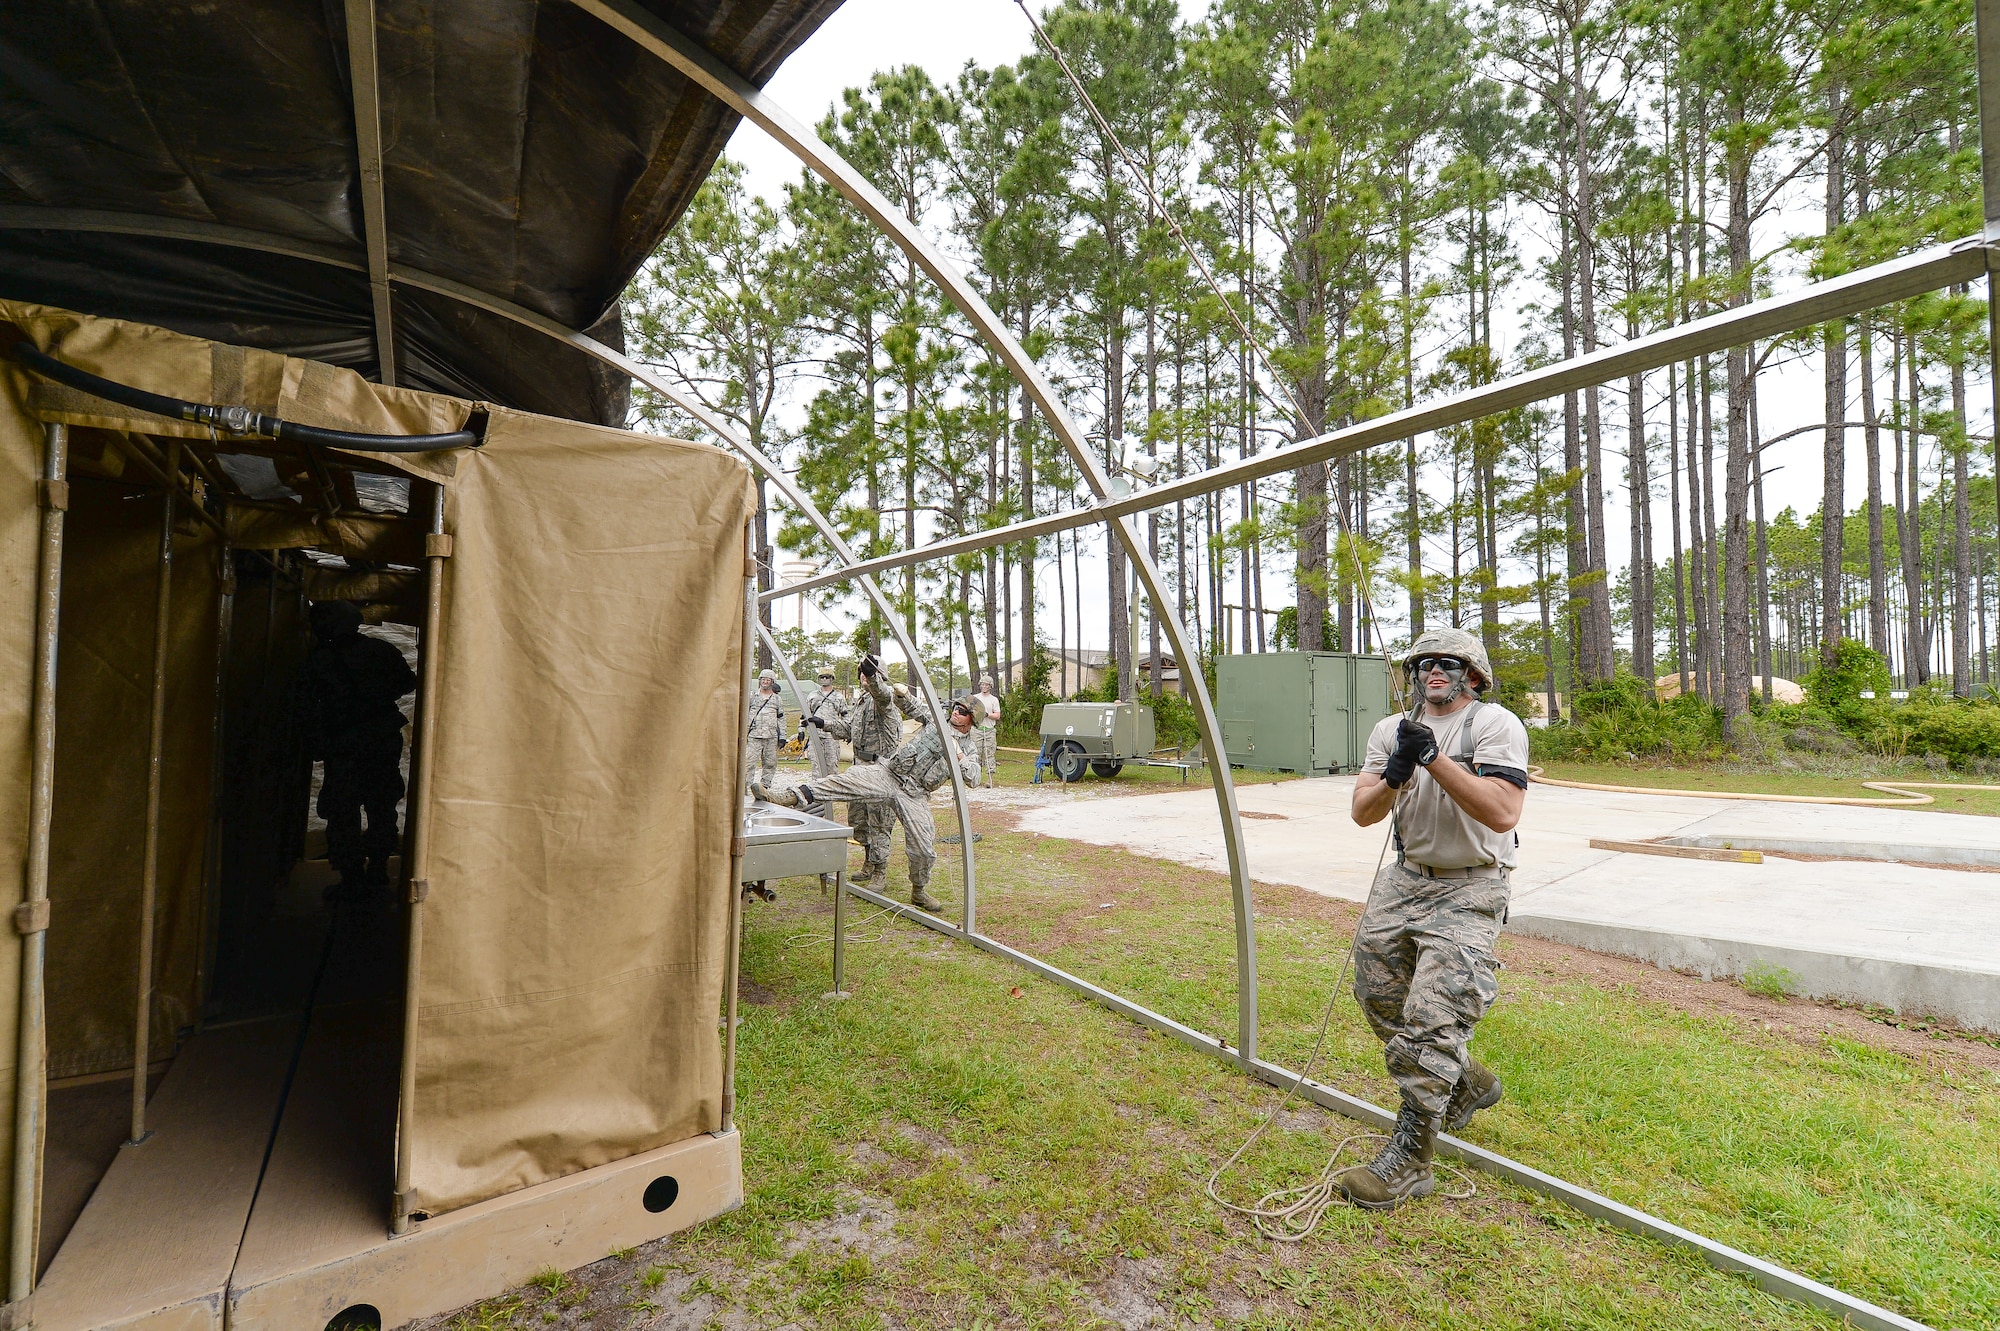 U.S. Air Force Staff Sgt. Jerry Vincent, water and fuel systems maintenance specialist with the 116th Civil Engineering Squadron (CES), Georgia Air National Guard (ANG), Robins Air Force Base, Ga., pulls the outer cover over a tent while erecting a shelter at Silver Flag training at Tyndall Air Force Base, Fla., April 17, 2014. During the weeklong course, Guardsmen from the 116th CES along with 219 Airmen from multiple U.S. Air Force active duty, Reserve and ANG units trained on building and maintaining bare-base operations at a simulated forward-deployed location. In addition, they honed their combat and survival skills, repaired simulated bomb-damaged runways, practiced EOD scenarios, set up base facilities and established various critical base operating support capabilities. Thirty-four Airmen from the 116th CES attended the exercise that consisted of extensive classroom and hands-on training culminating in an evaluation of learned skills on the last day of class. (U.S. Air National Guard photo by Master Sgt. Roger Parsons/Released)